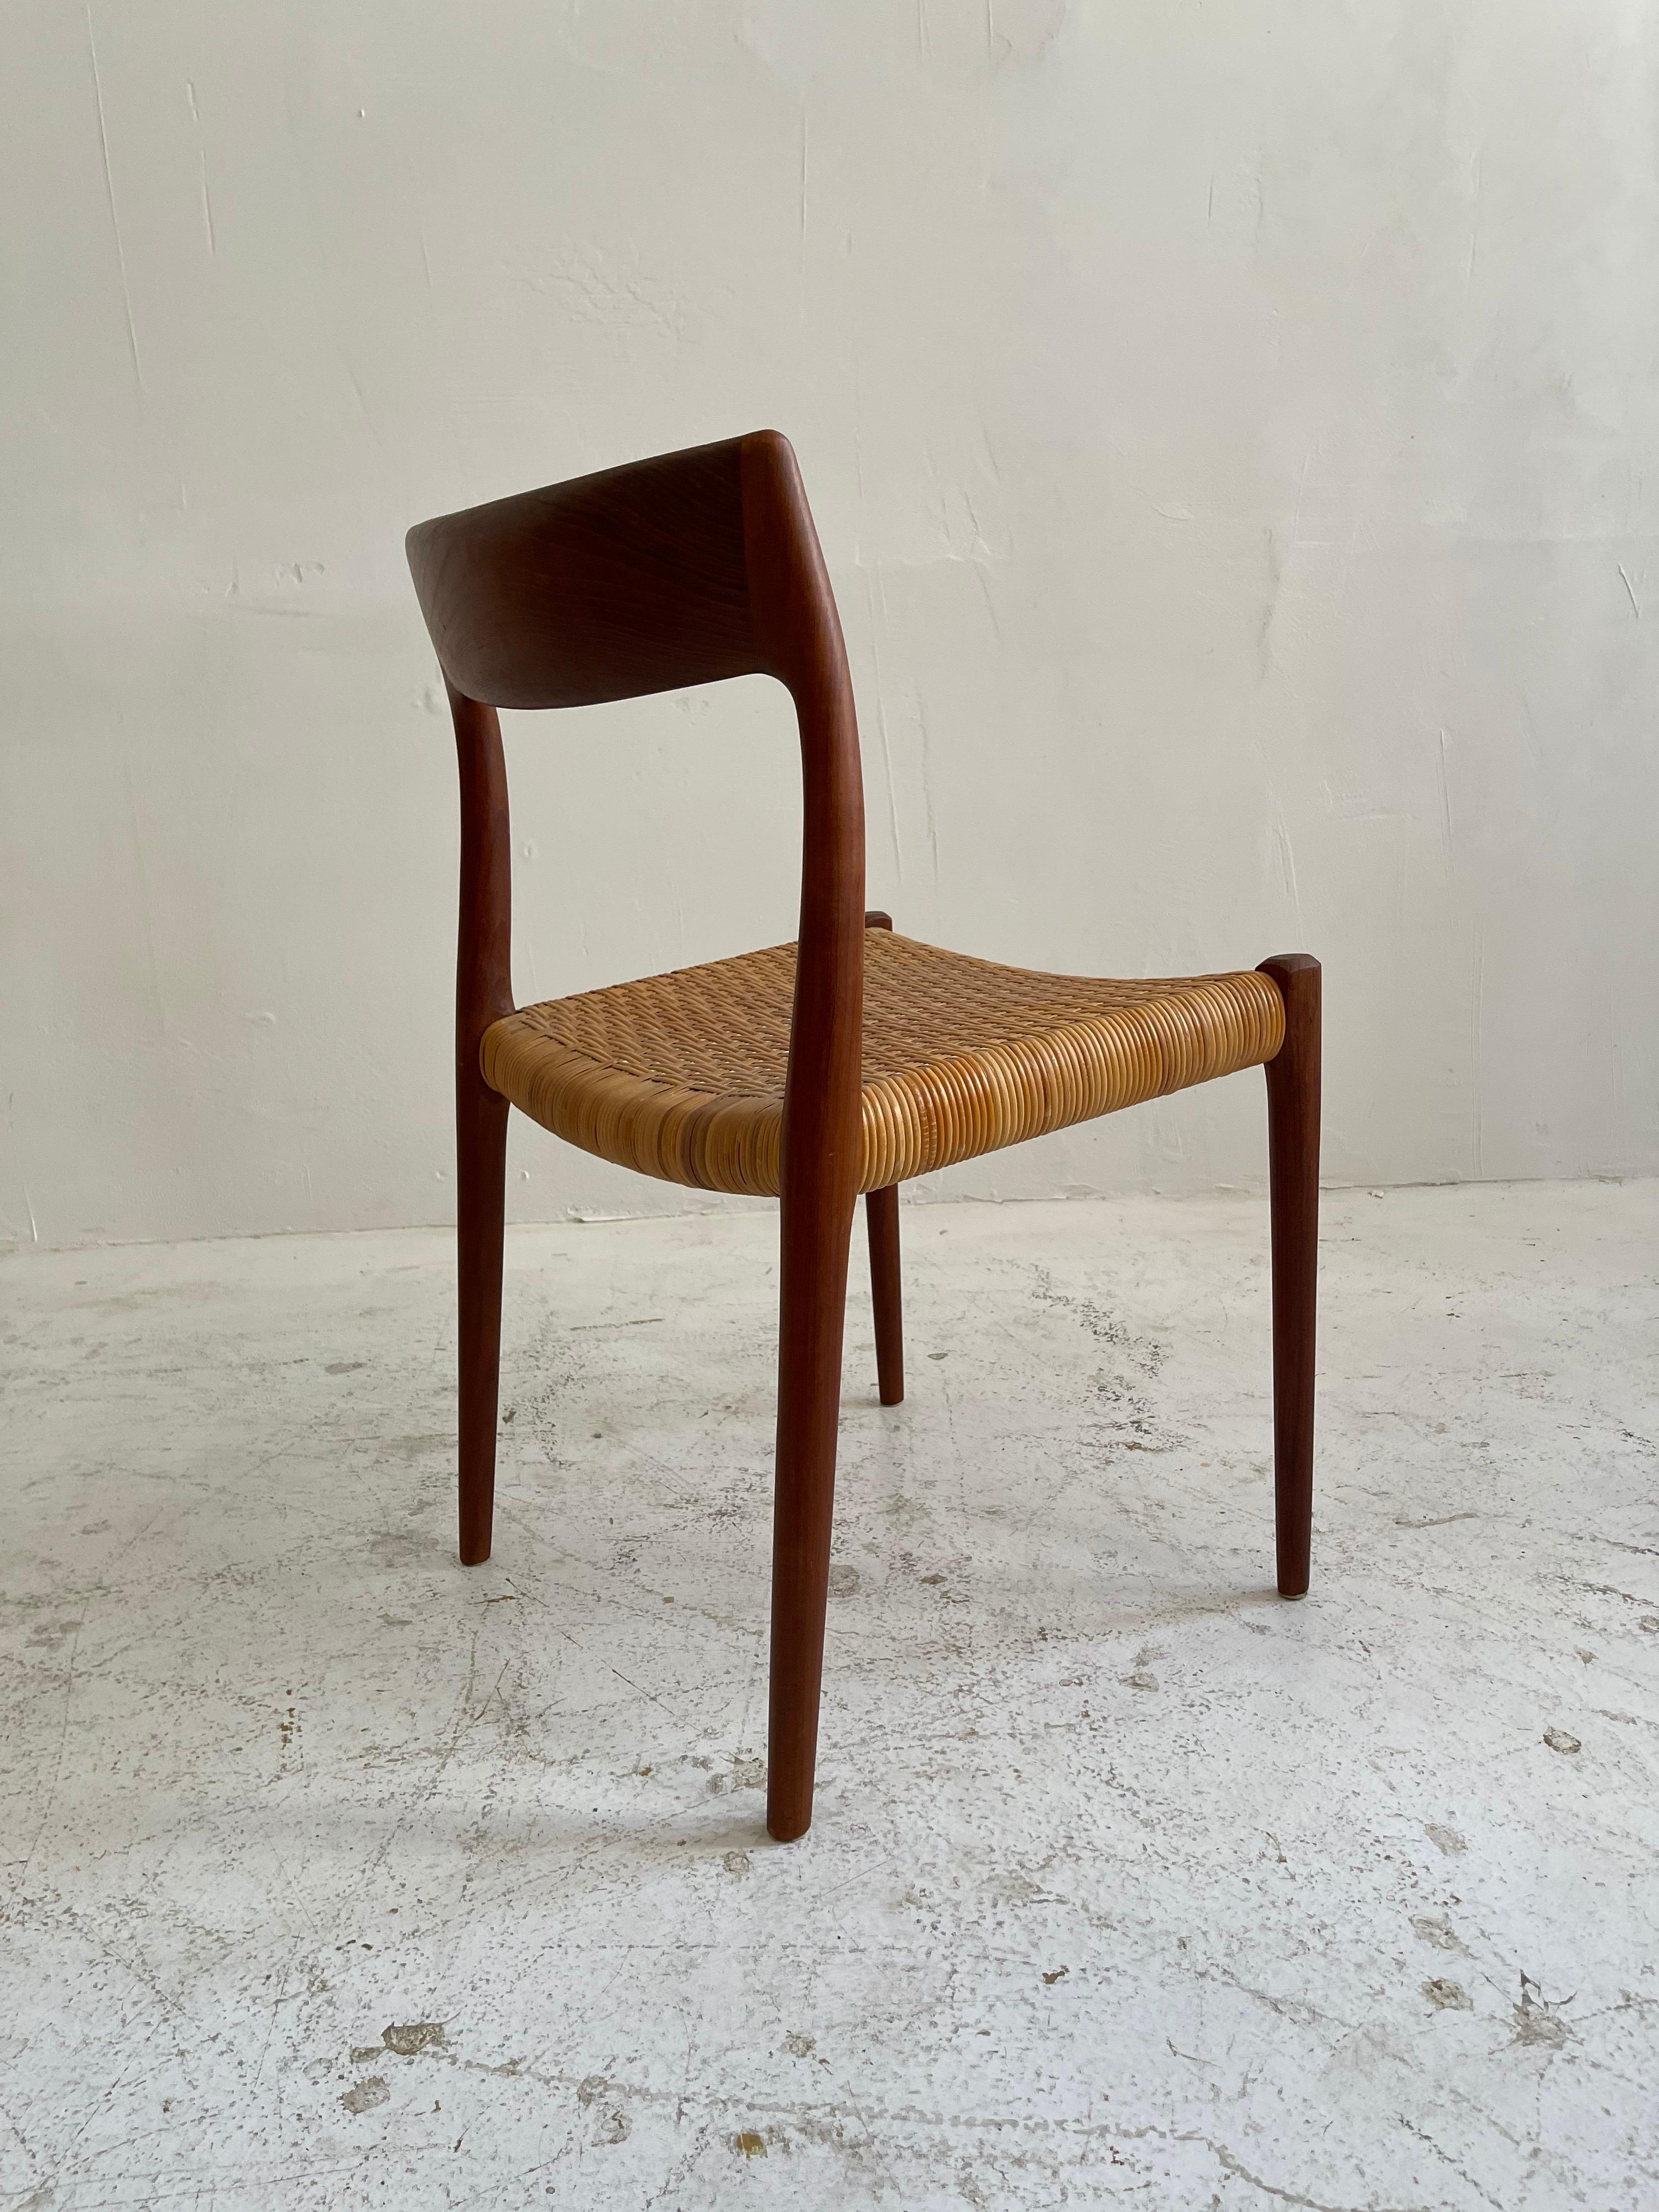 Teak Early Set of Six Niels Moller Chairs No 77, Denmark 1958